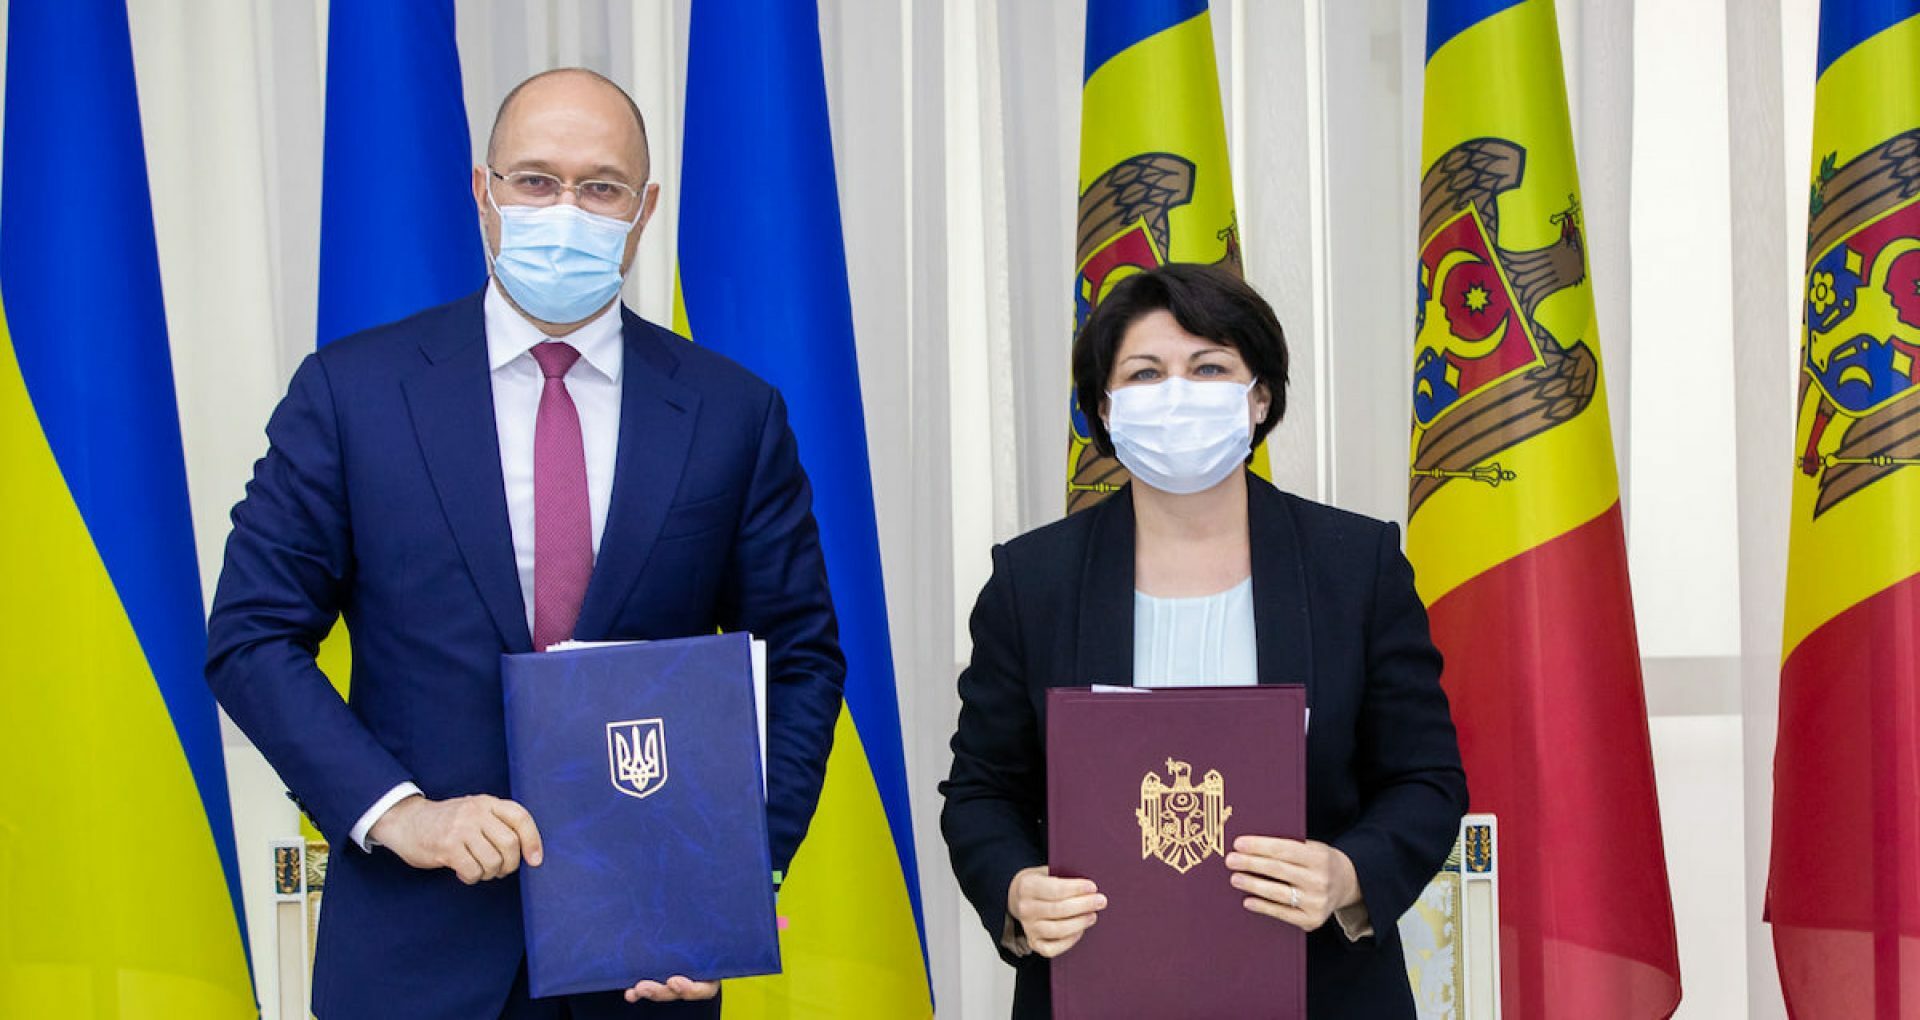 The Moldovan and the Ukrainian Prime Ministers Signed the Amendment to the  Free Trade Agreement